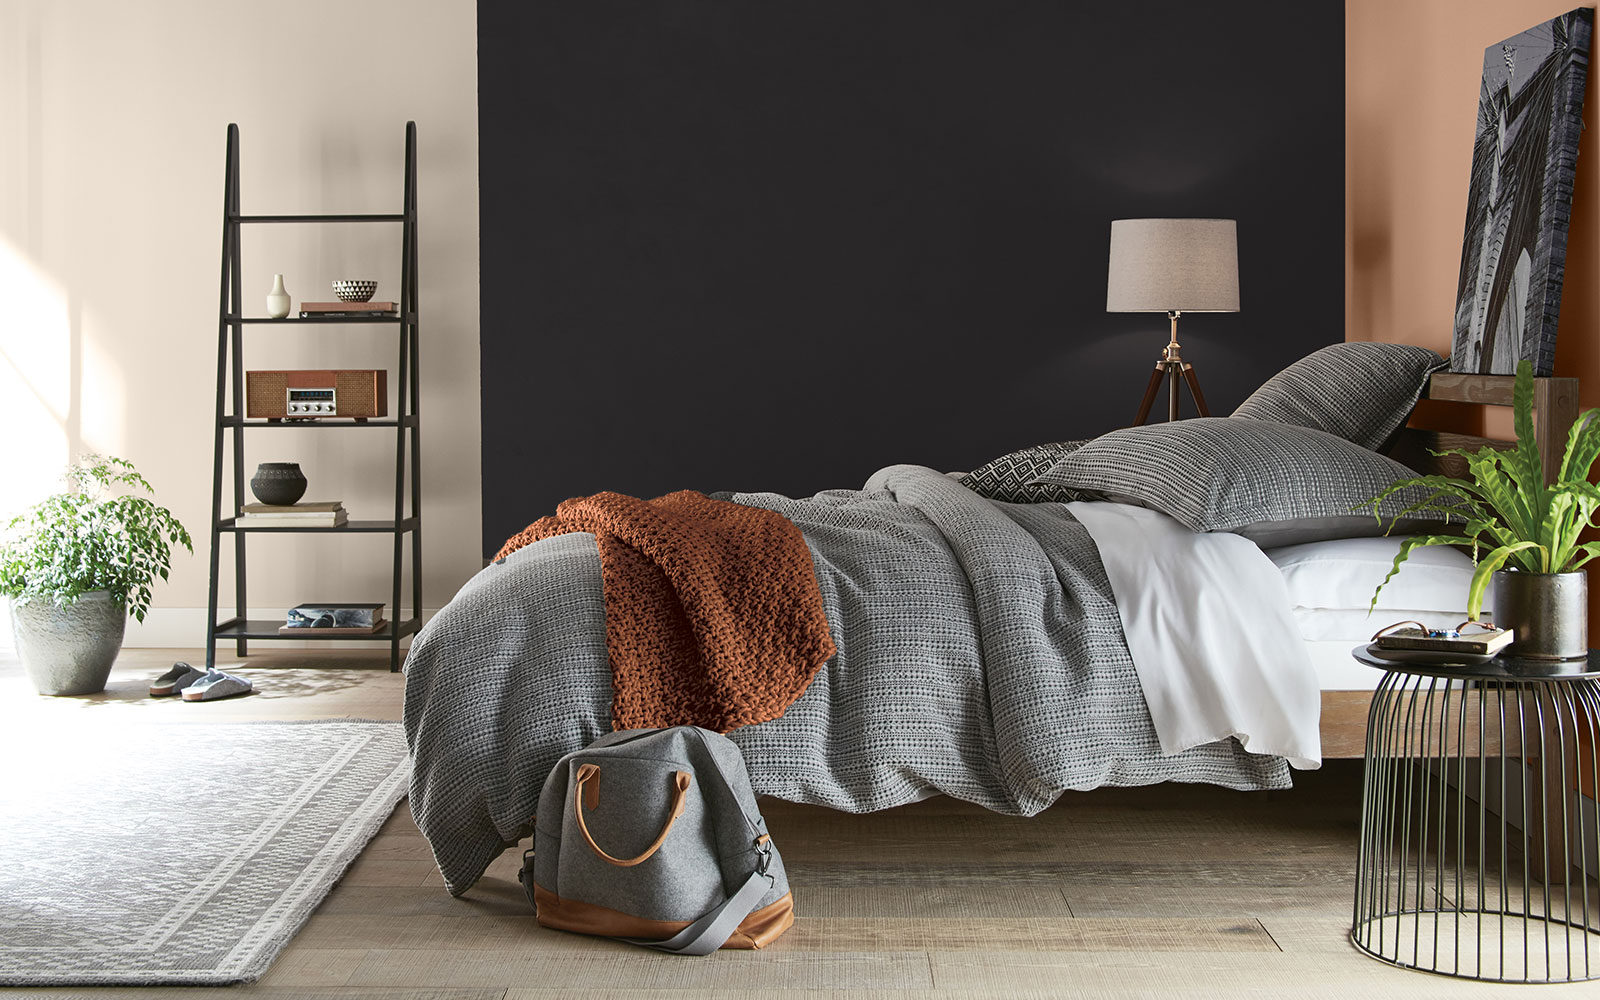 A bed room image with four color swatches sitting beside it. The image displays the four colors: A black hue is used on the side wall of the bedroom, a creamy white hue is used for a wall just outside of the bed area, a terra-cotta orange is used for a blanket, and a dusty orange hue is used on the headboard wall.